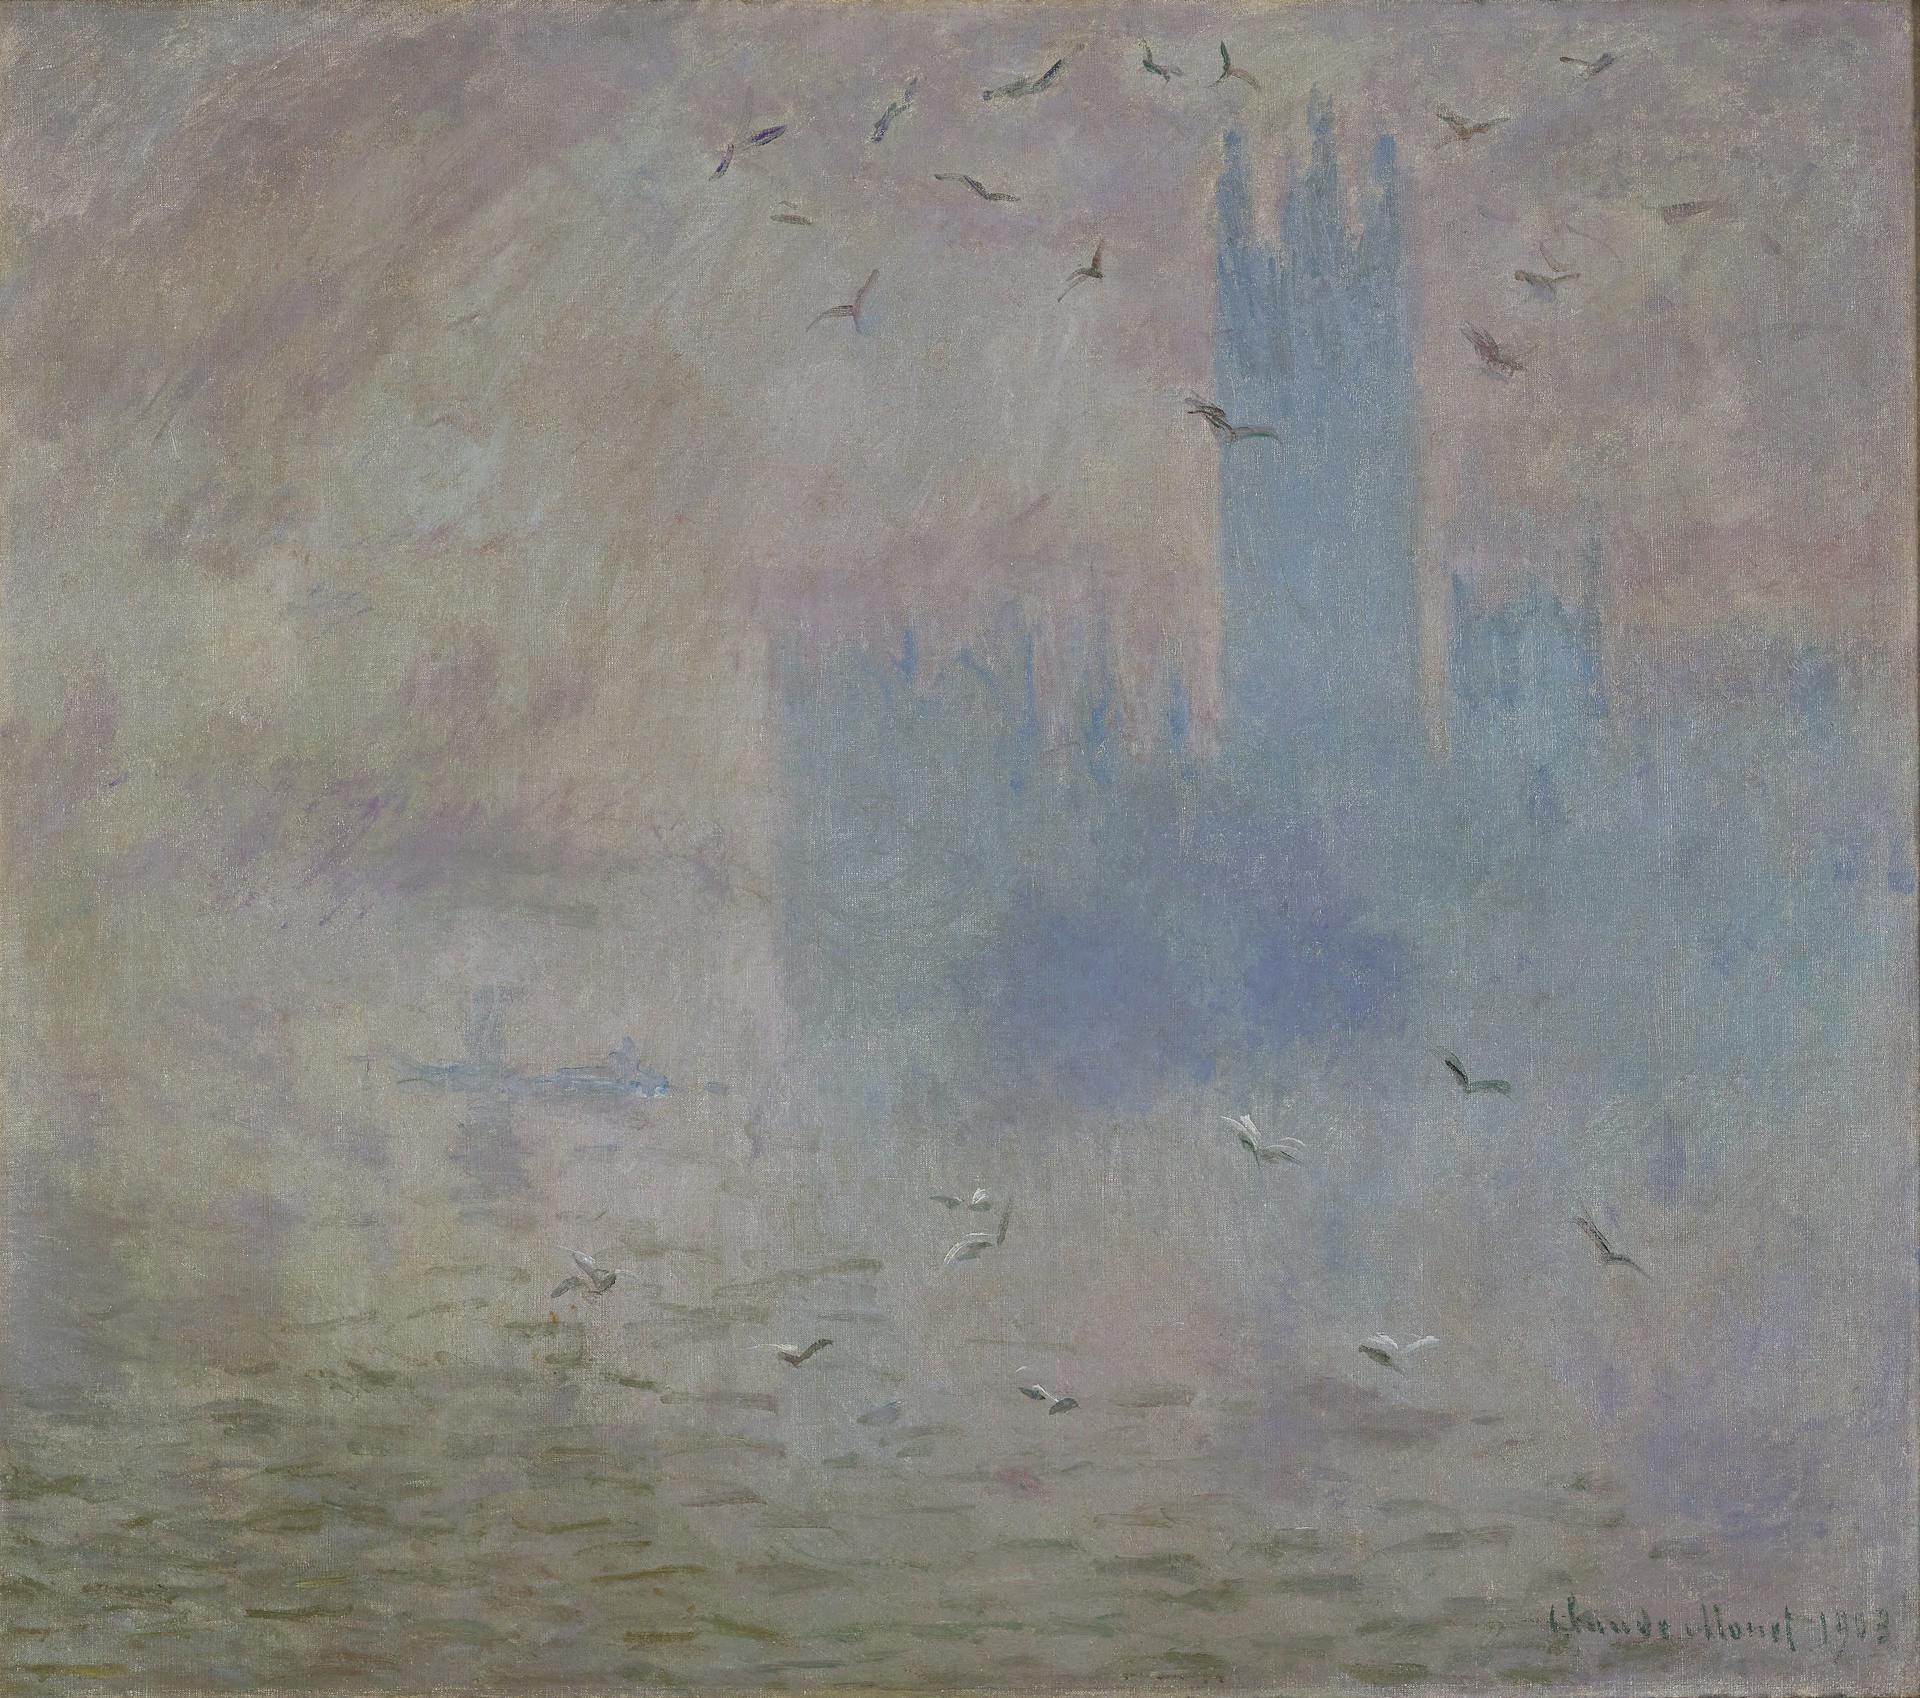 Monet’s The Houses of Parliament, Seagulls is a pageant of purples